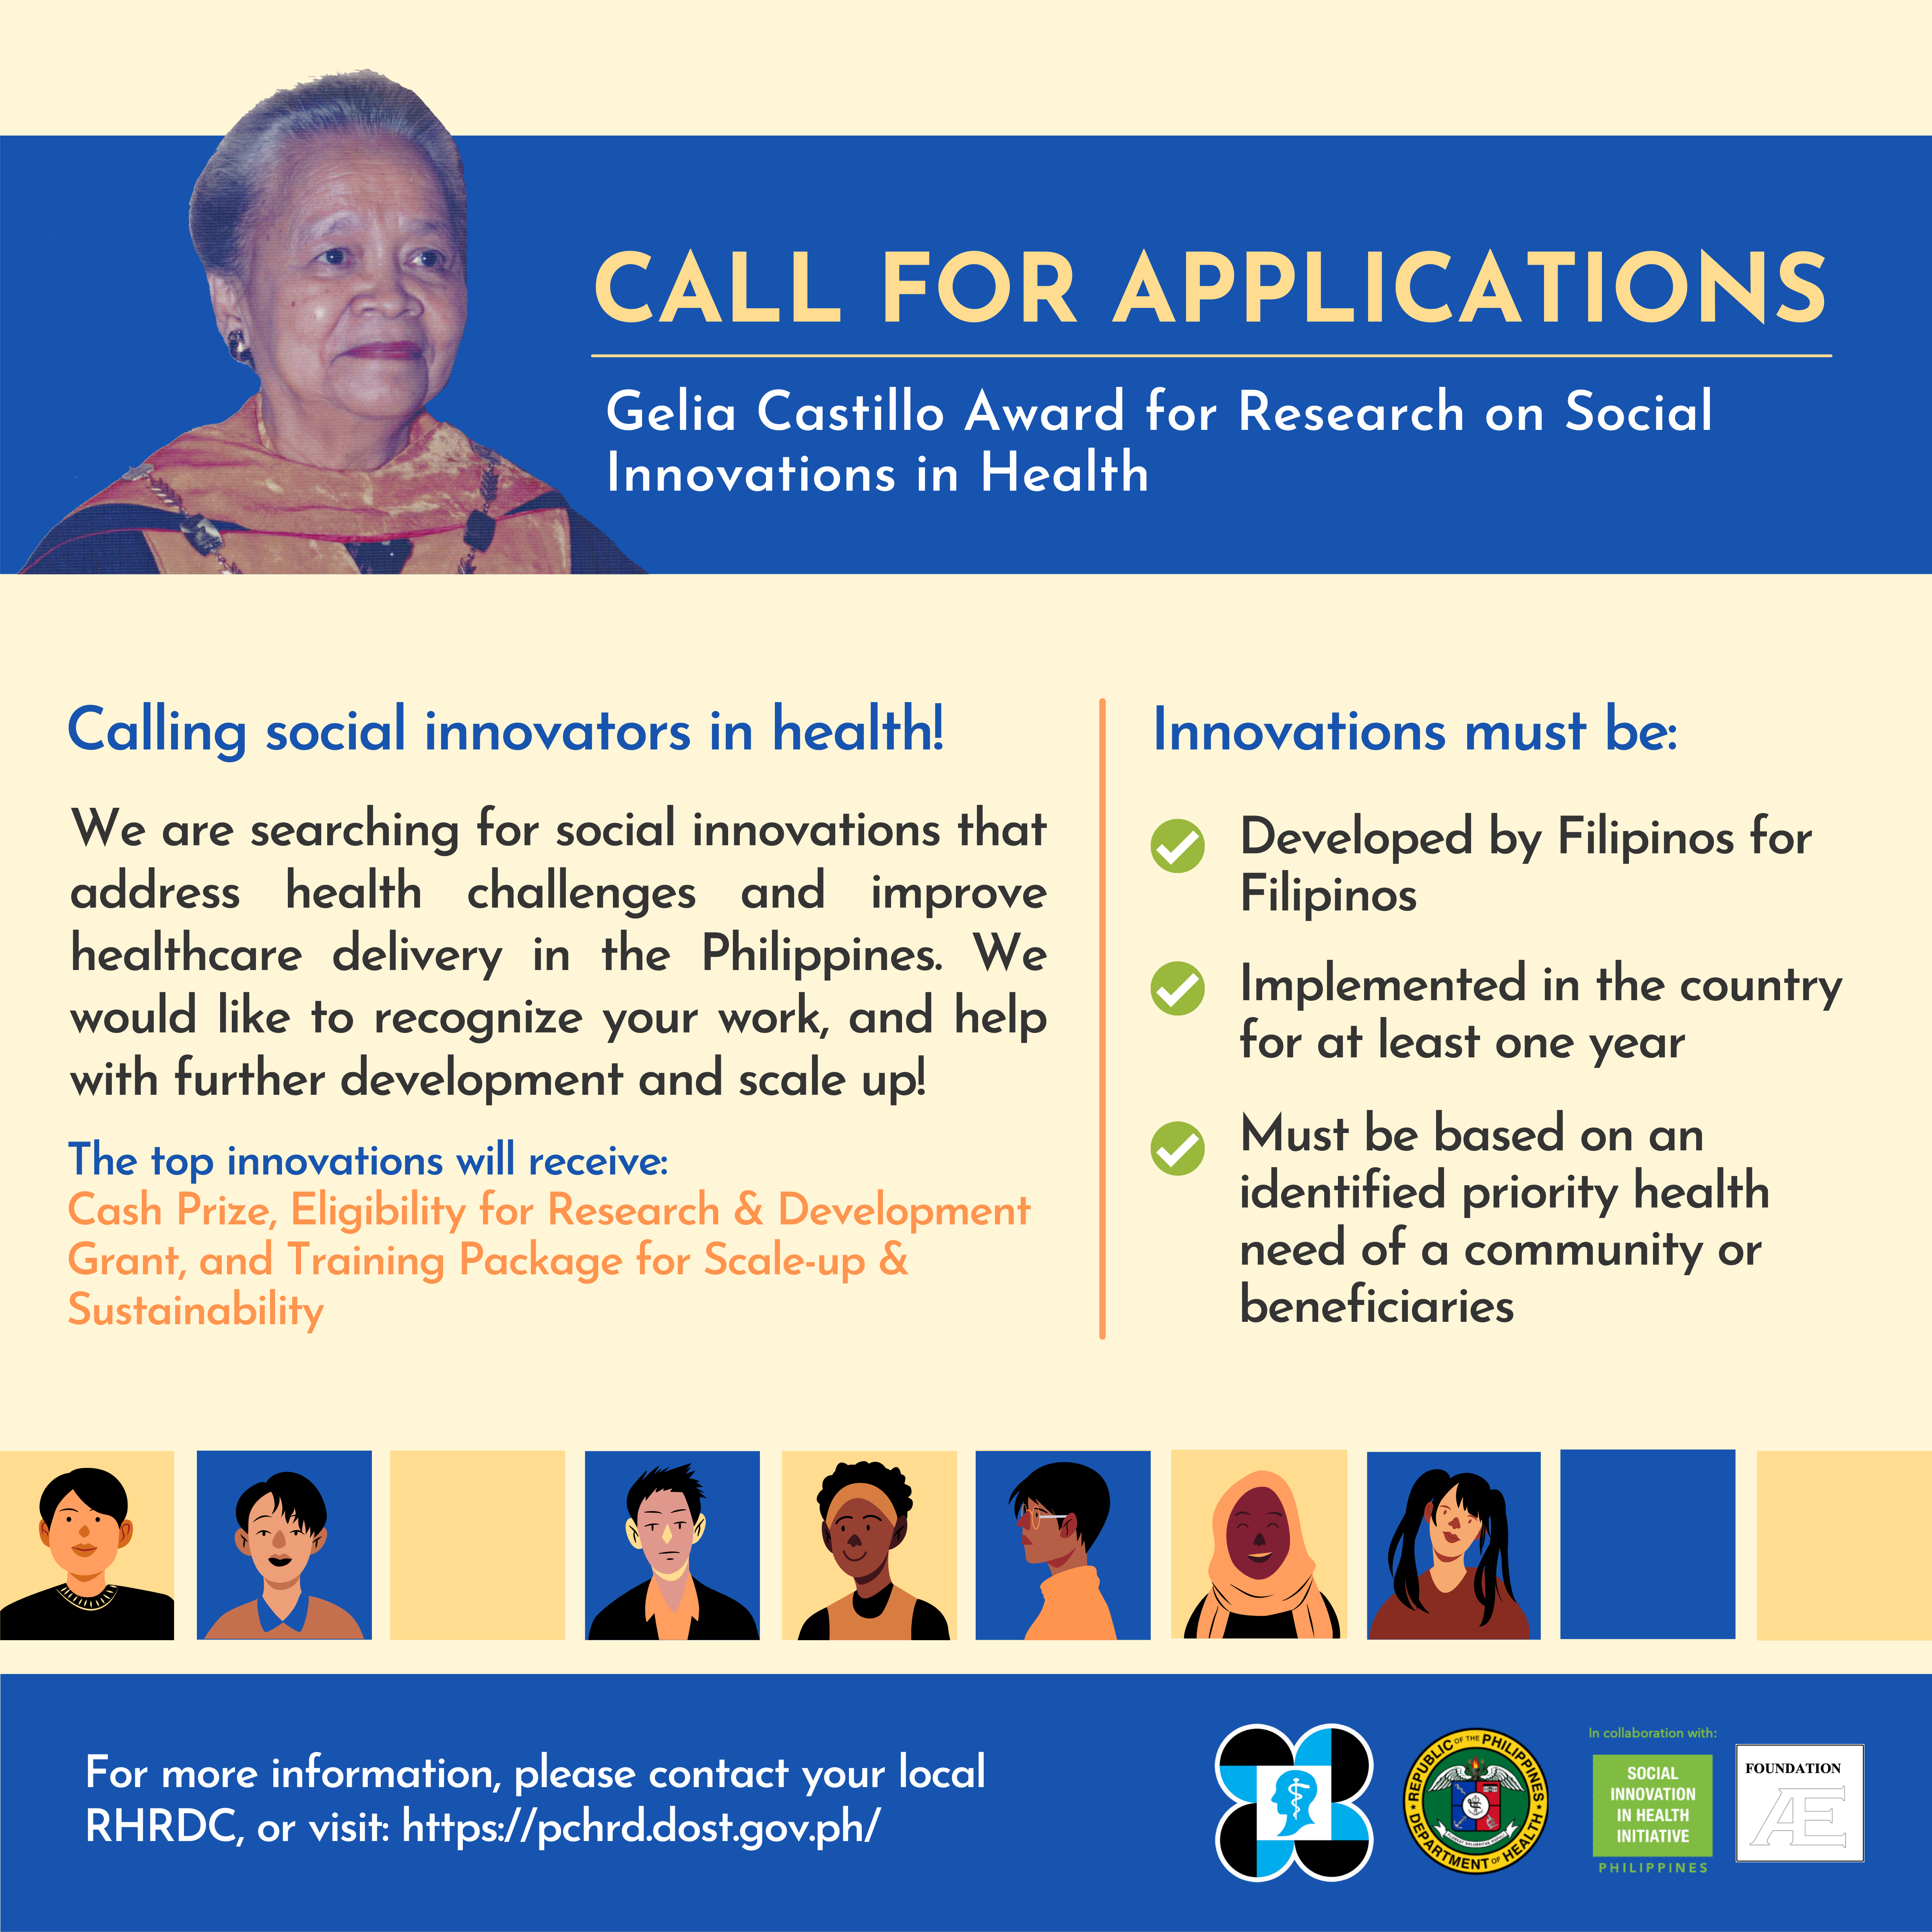 Extended until June 17, 2022: Call for Submissions: The Gelia Castillo Award for Research on Social Innovations in Health